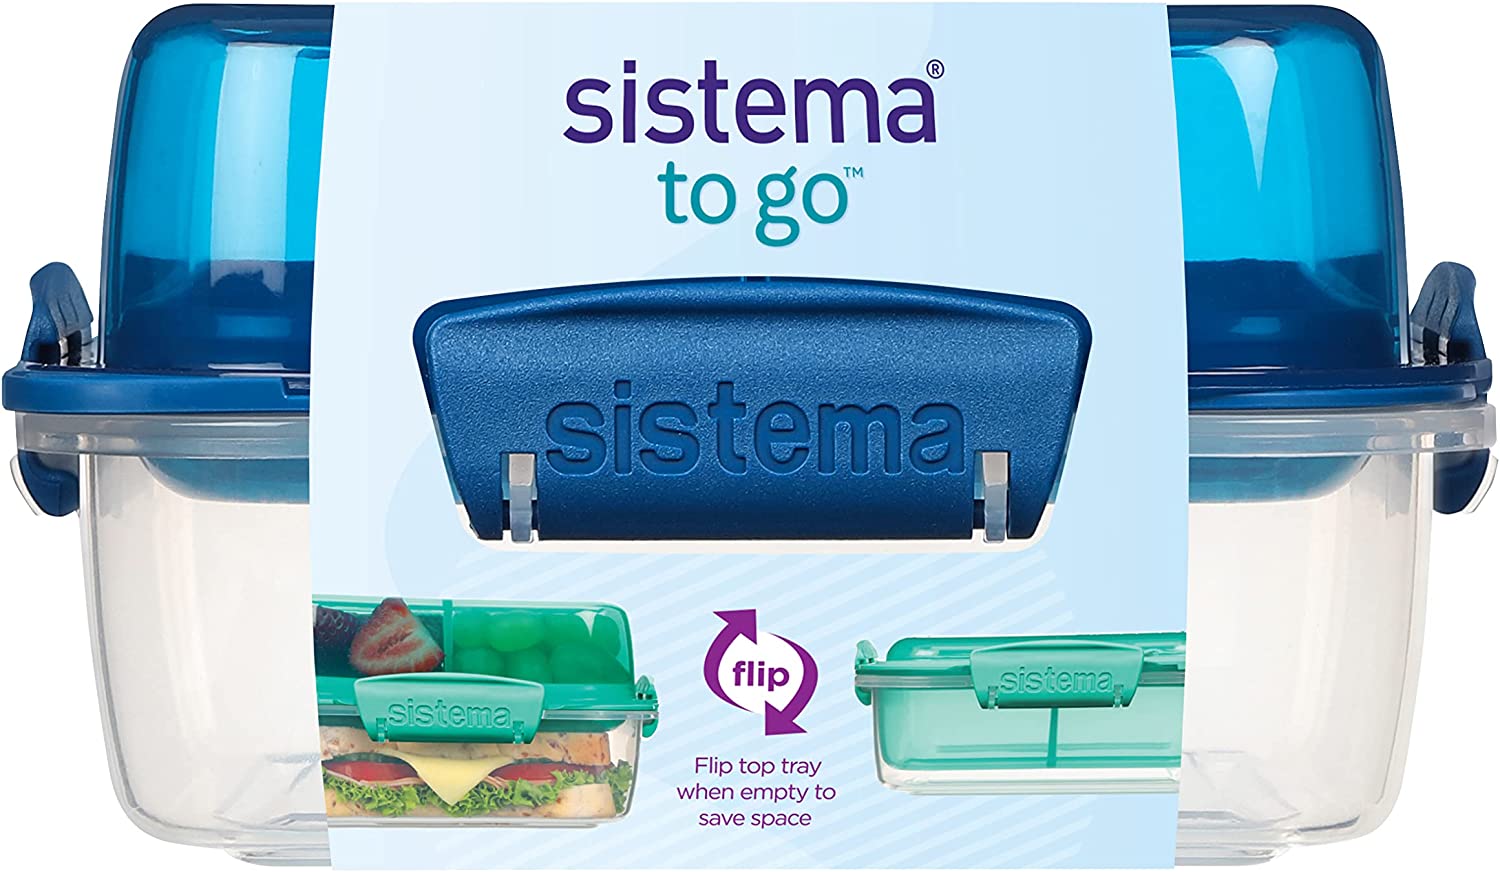 Sistema To Go Review – What's Good To Do